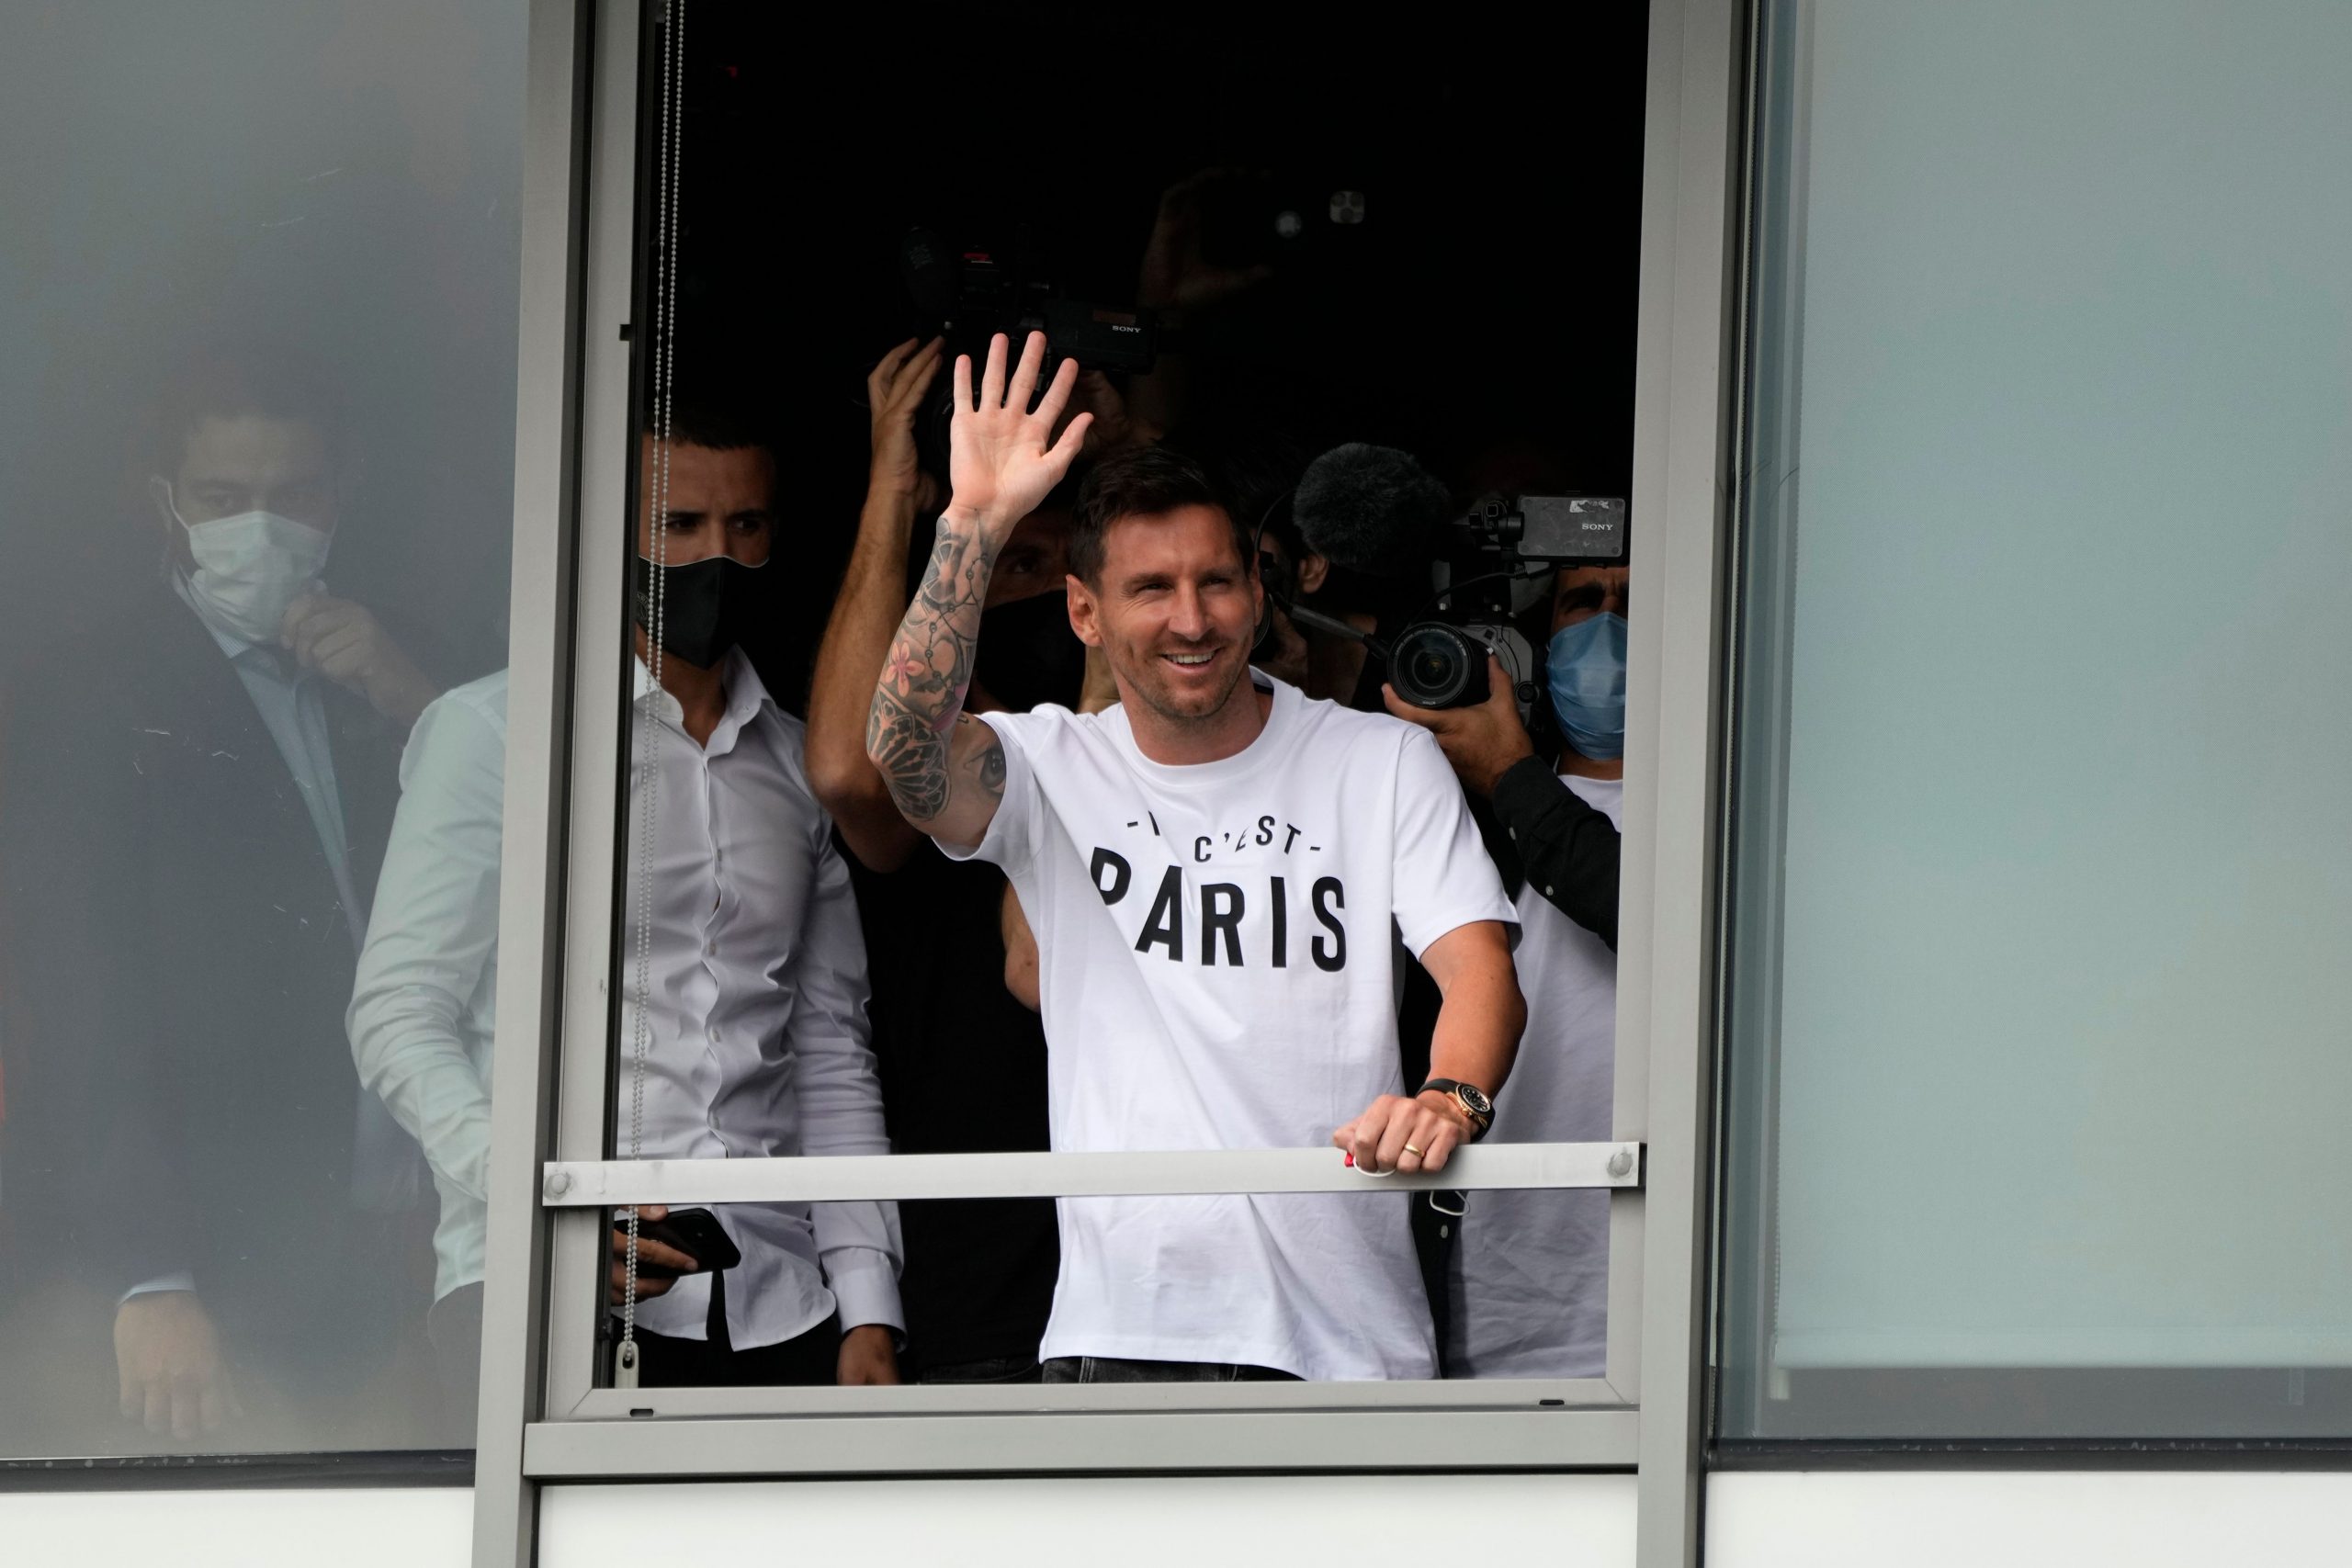 All about the Royal Monceau, the hotel where Lionel Messi will live